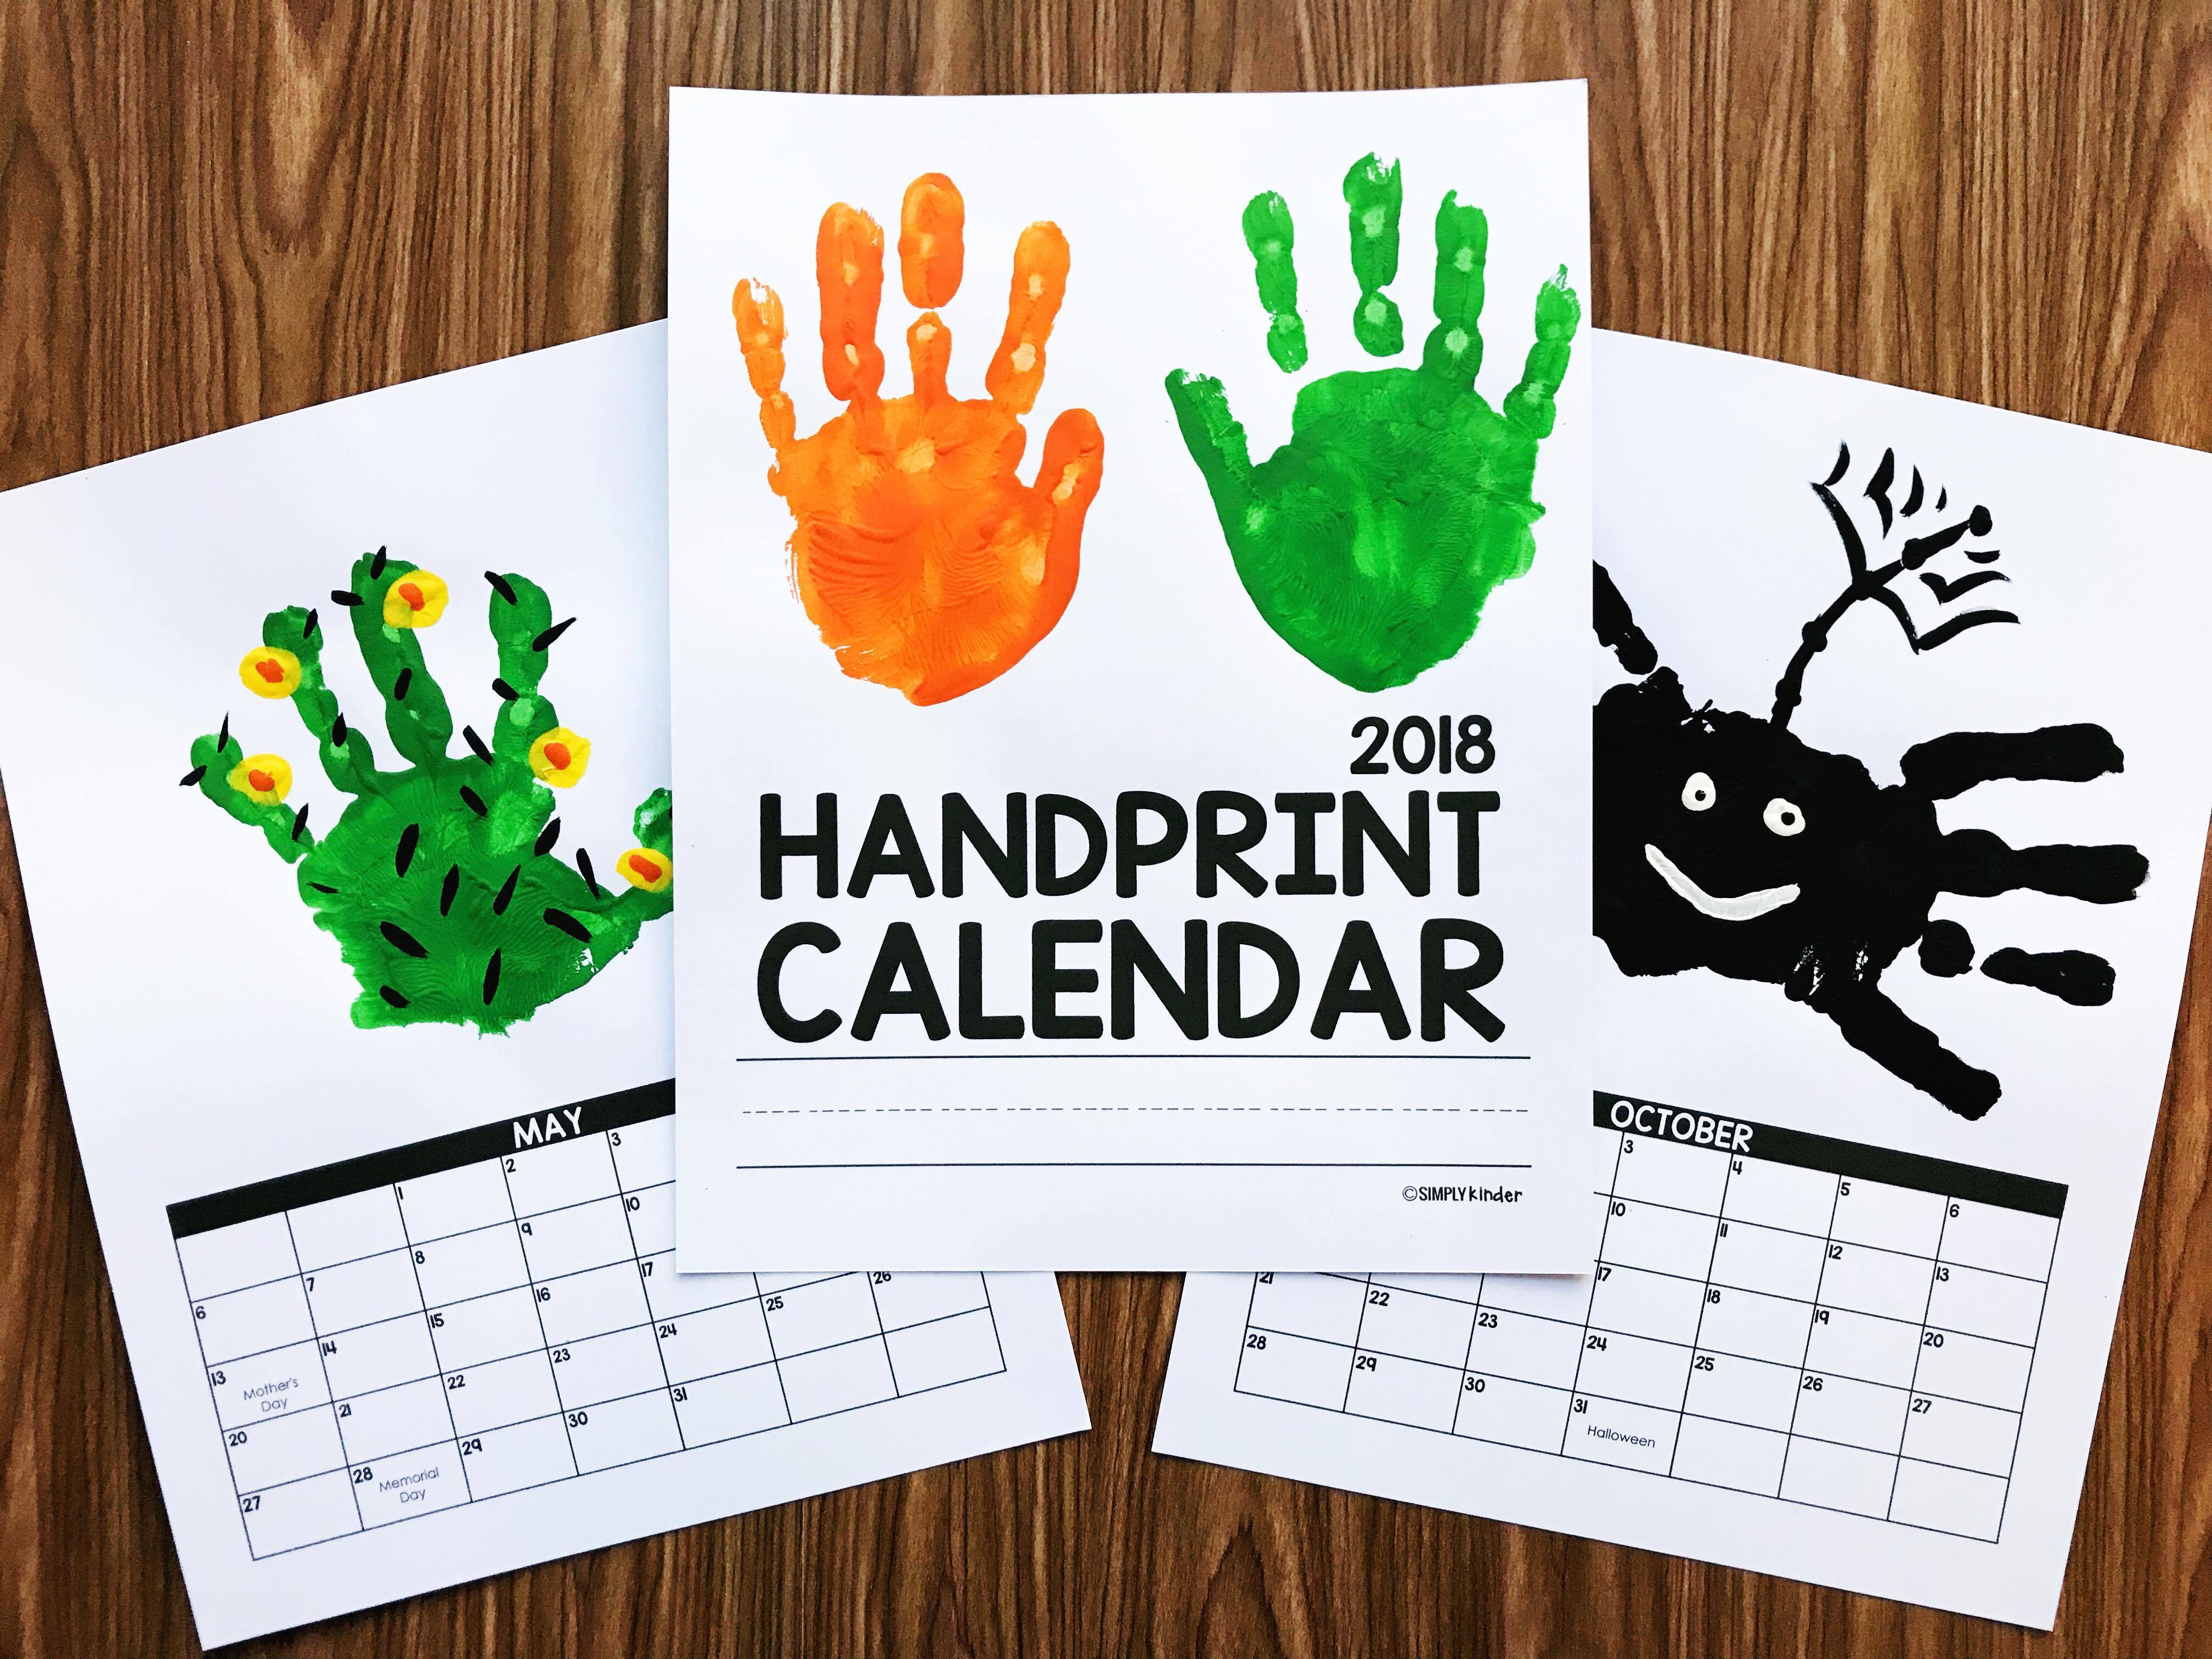 Handprint Calendar from Simply Kinder. This no-fuss calendar will be a perfect gift for your families. It's editable so you can change the calendar year after year and it's one page per month so there is no fumbling with matching the backs of months to the front to get the order right. It's also super simple with no titles or poems so you can easily do your own handprint ideas or use the samples provided.